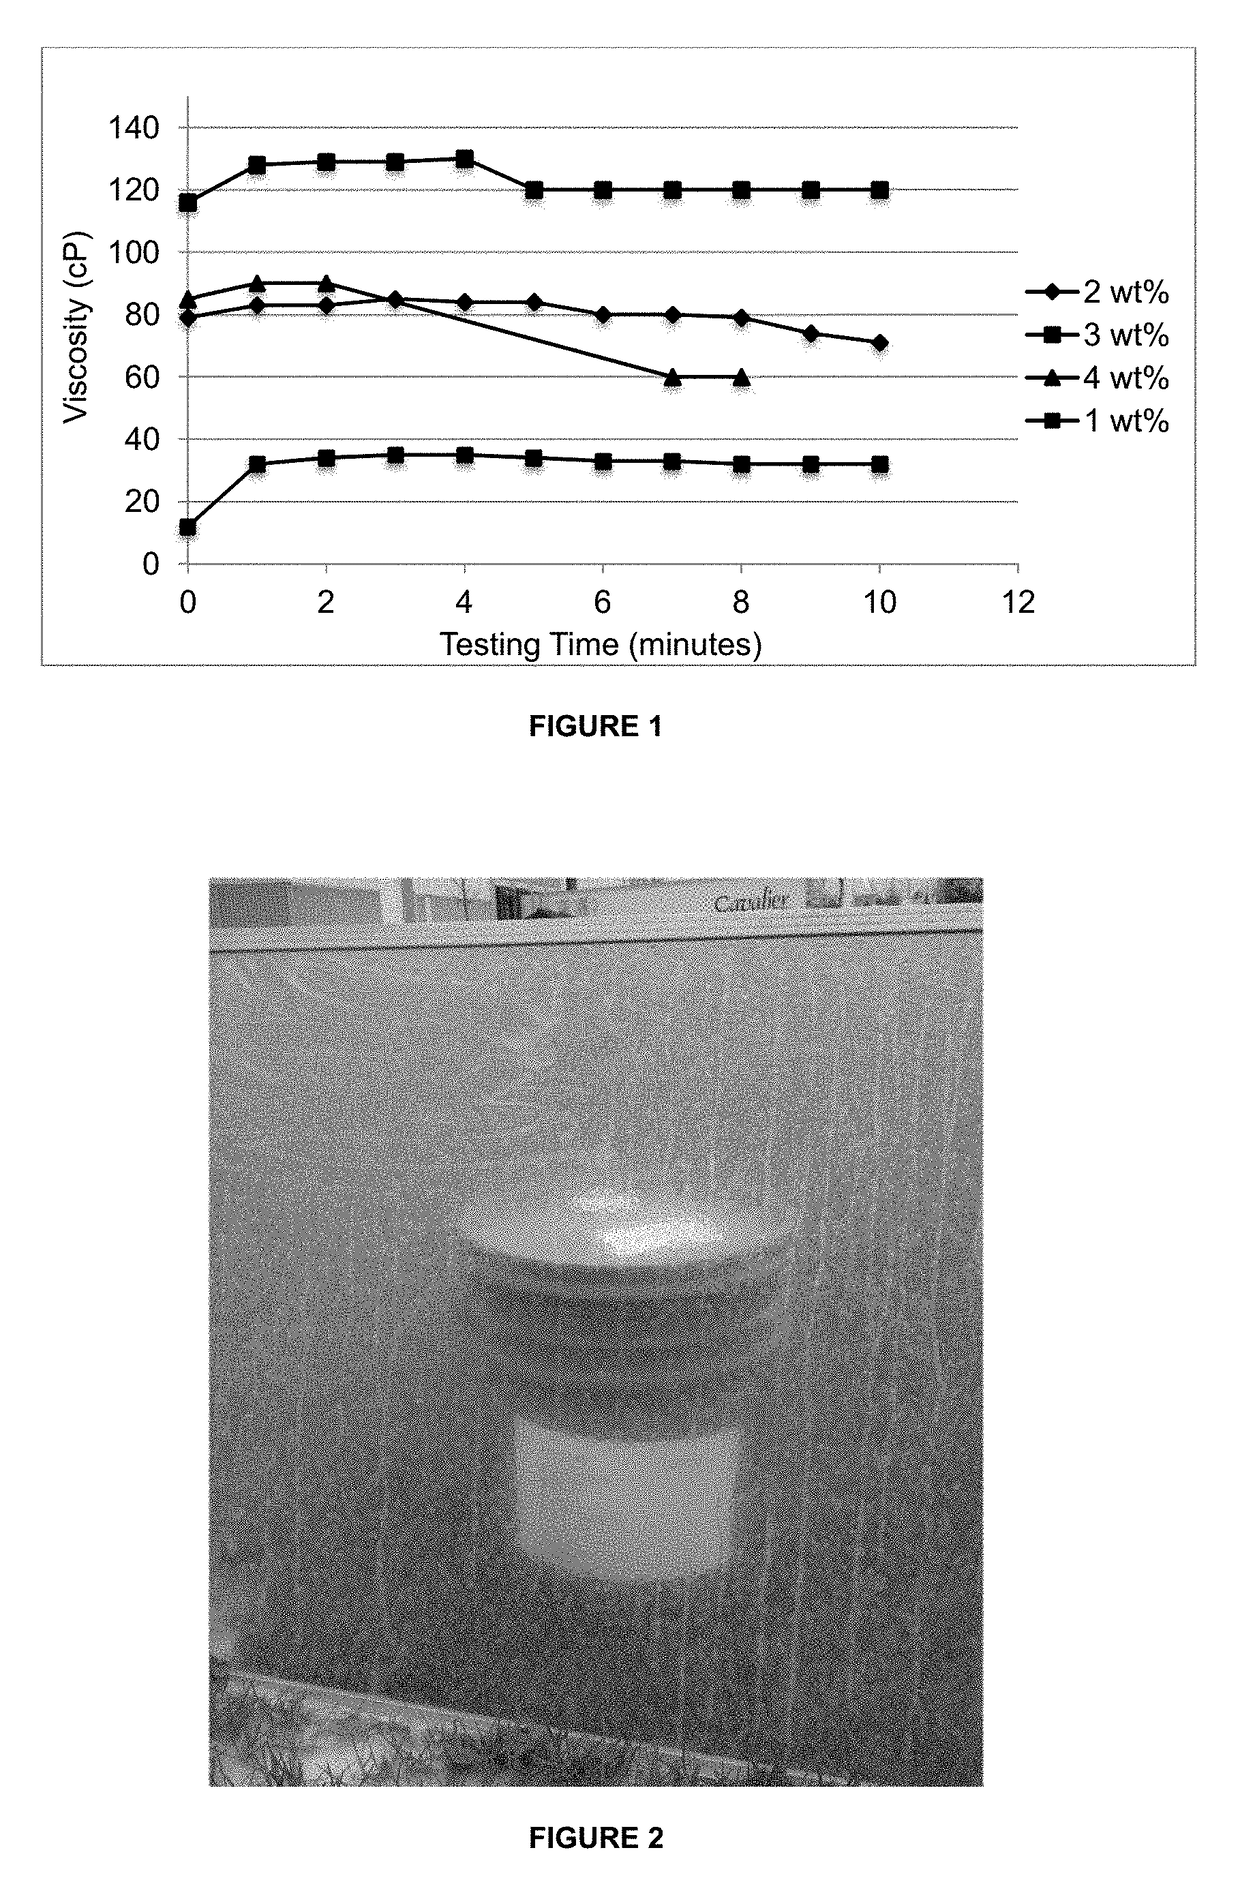 Water-enhancing, fire-suppressing hydrogels